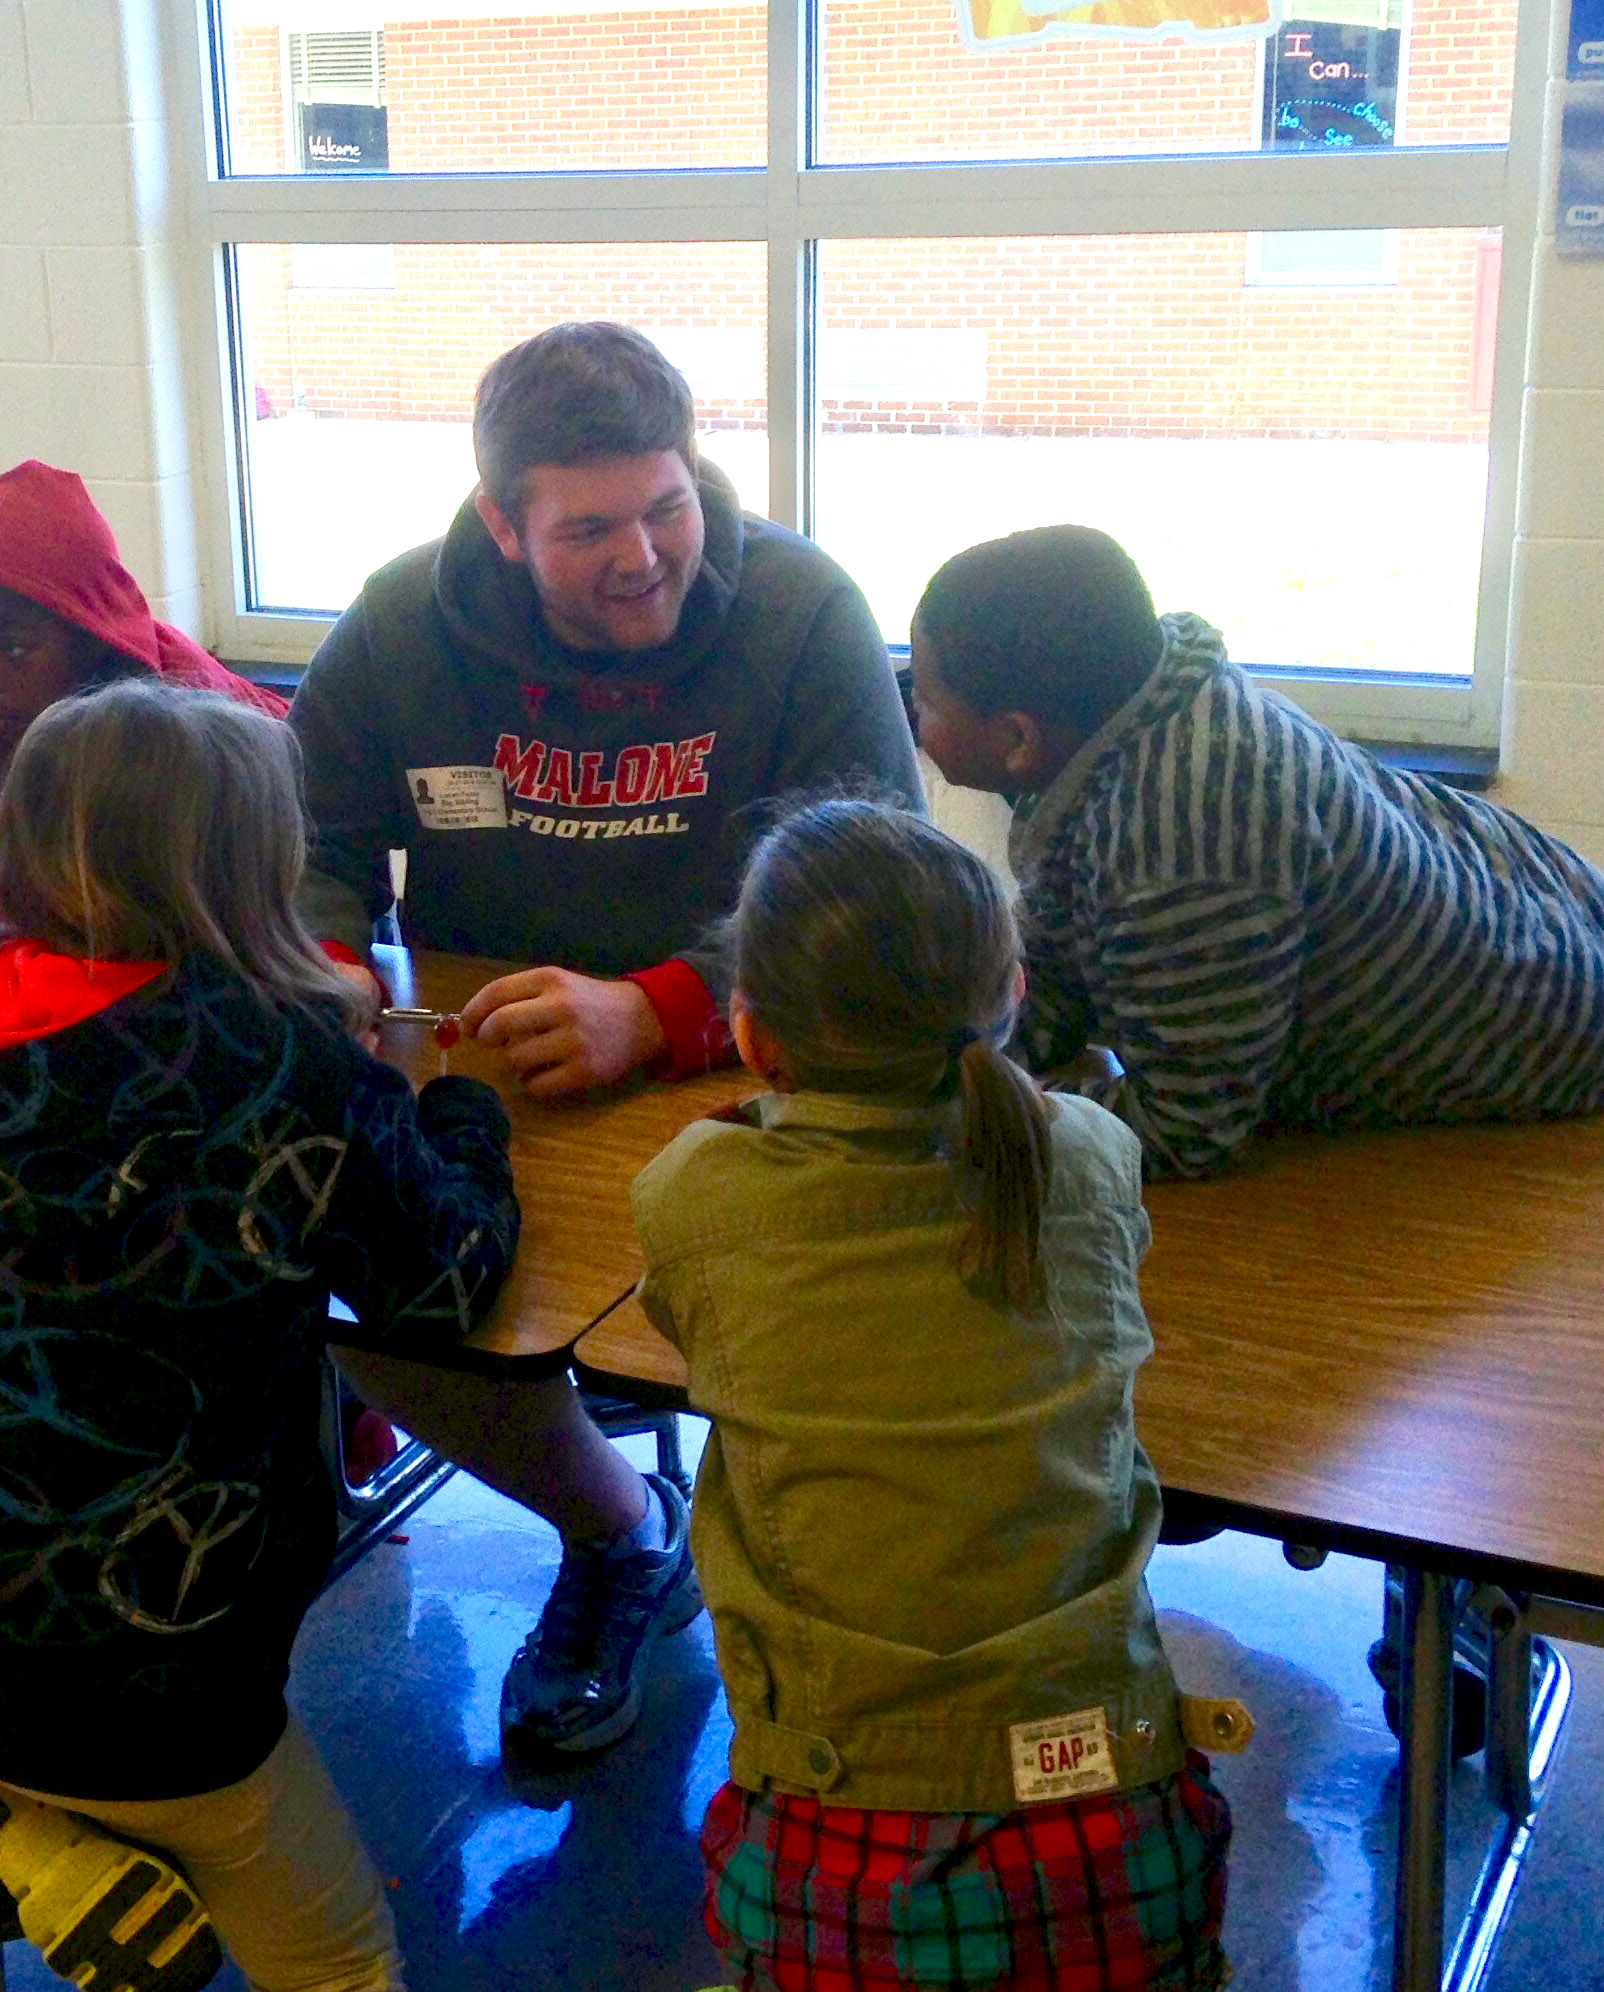 A mentor works with Prince Edward Elementary students at lunch.